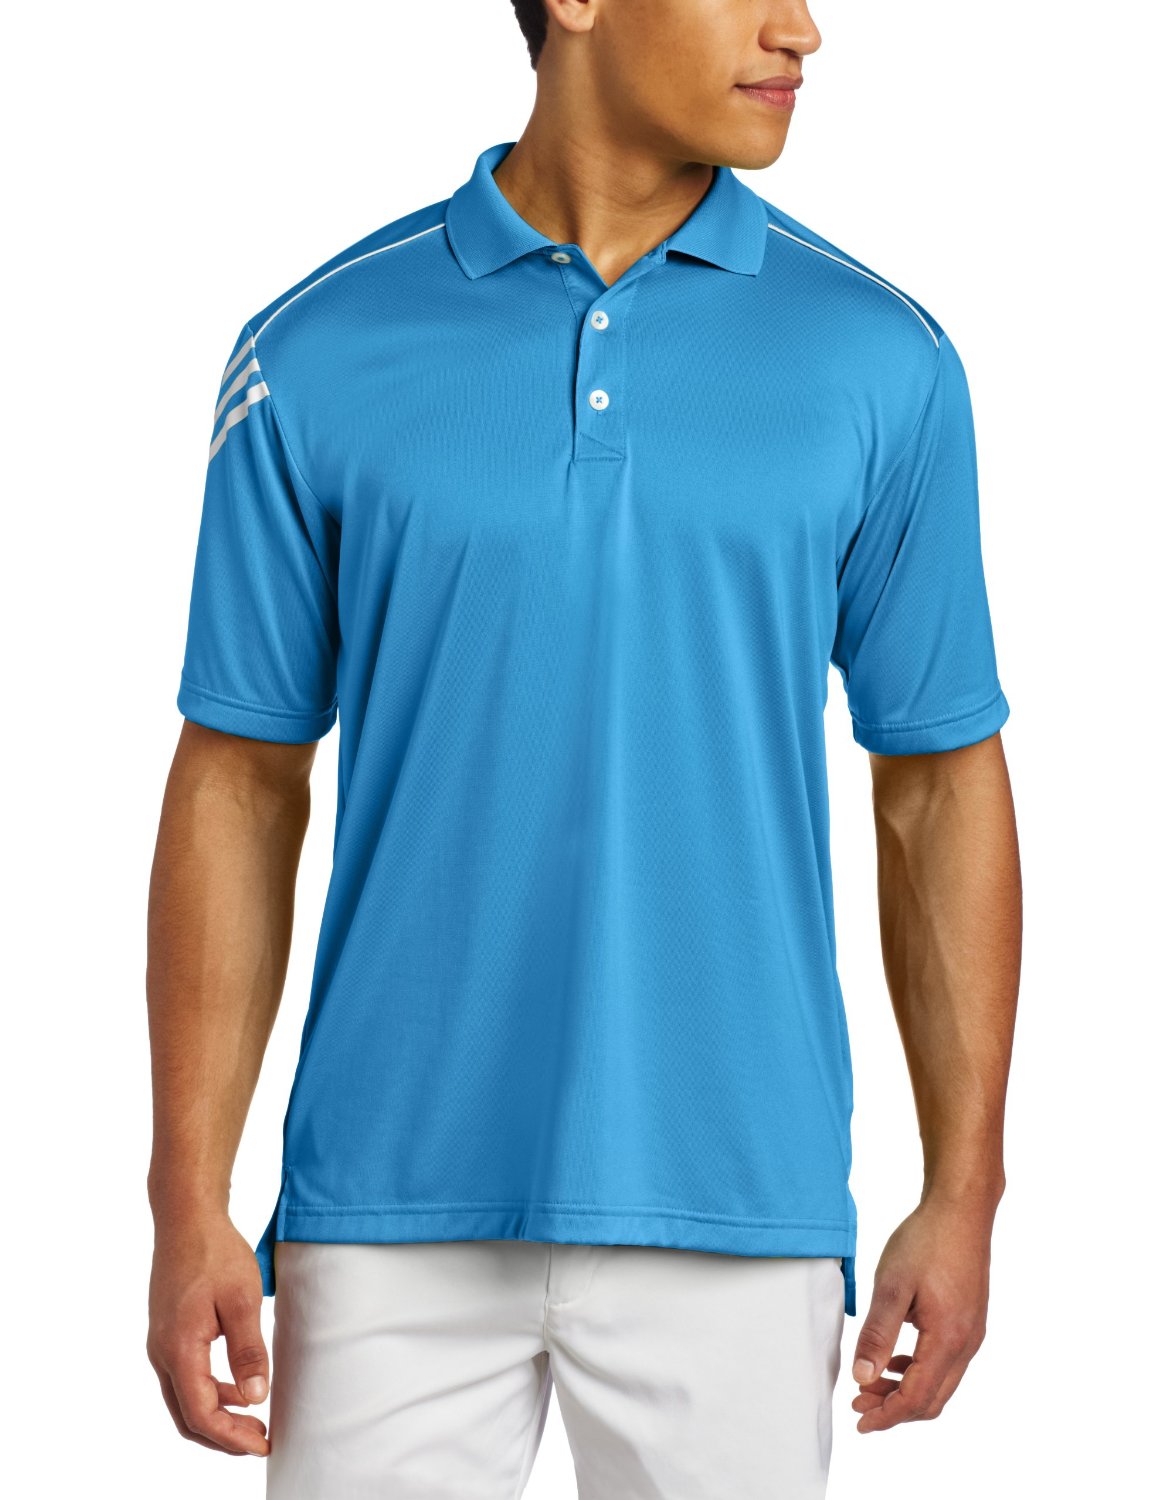 Mens Golf Shirts Collection